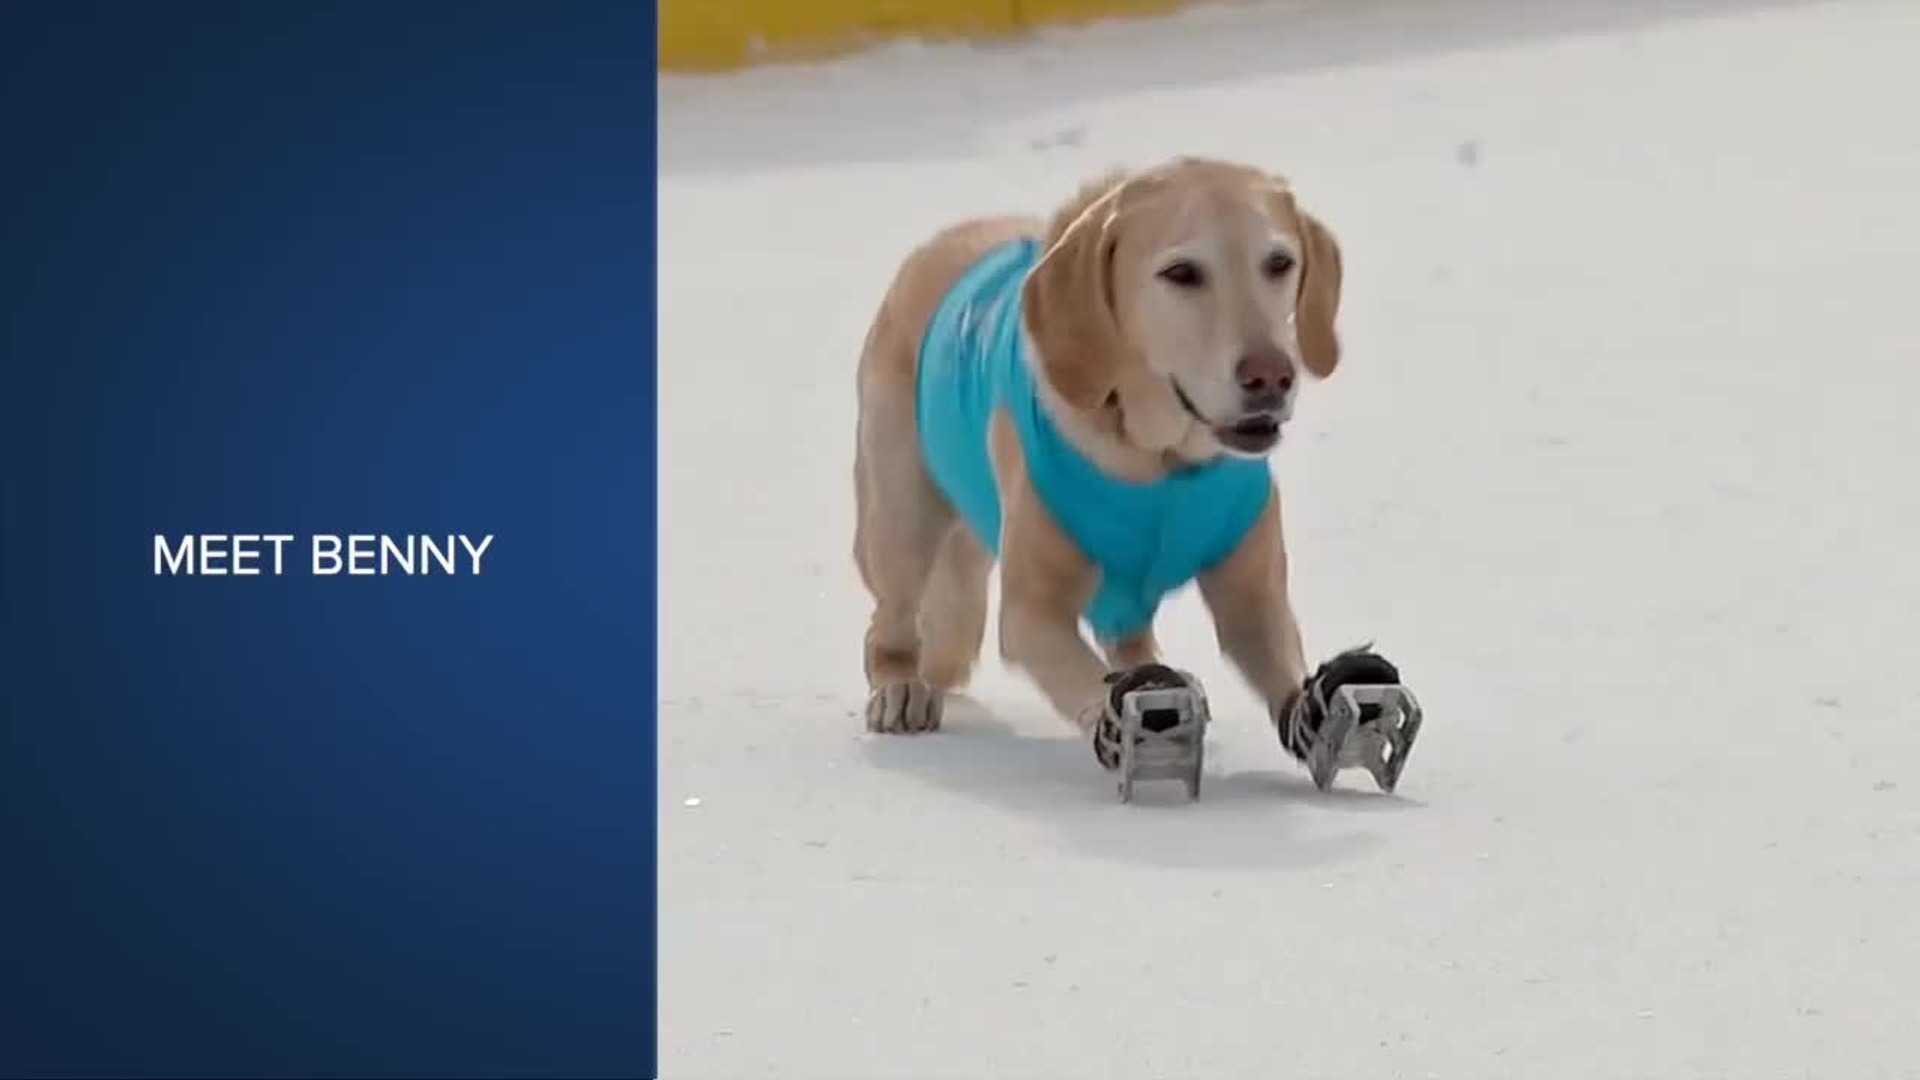 Check This Out: Ice skating dog performs for charity